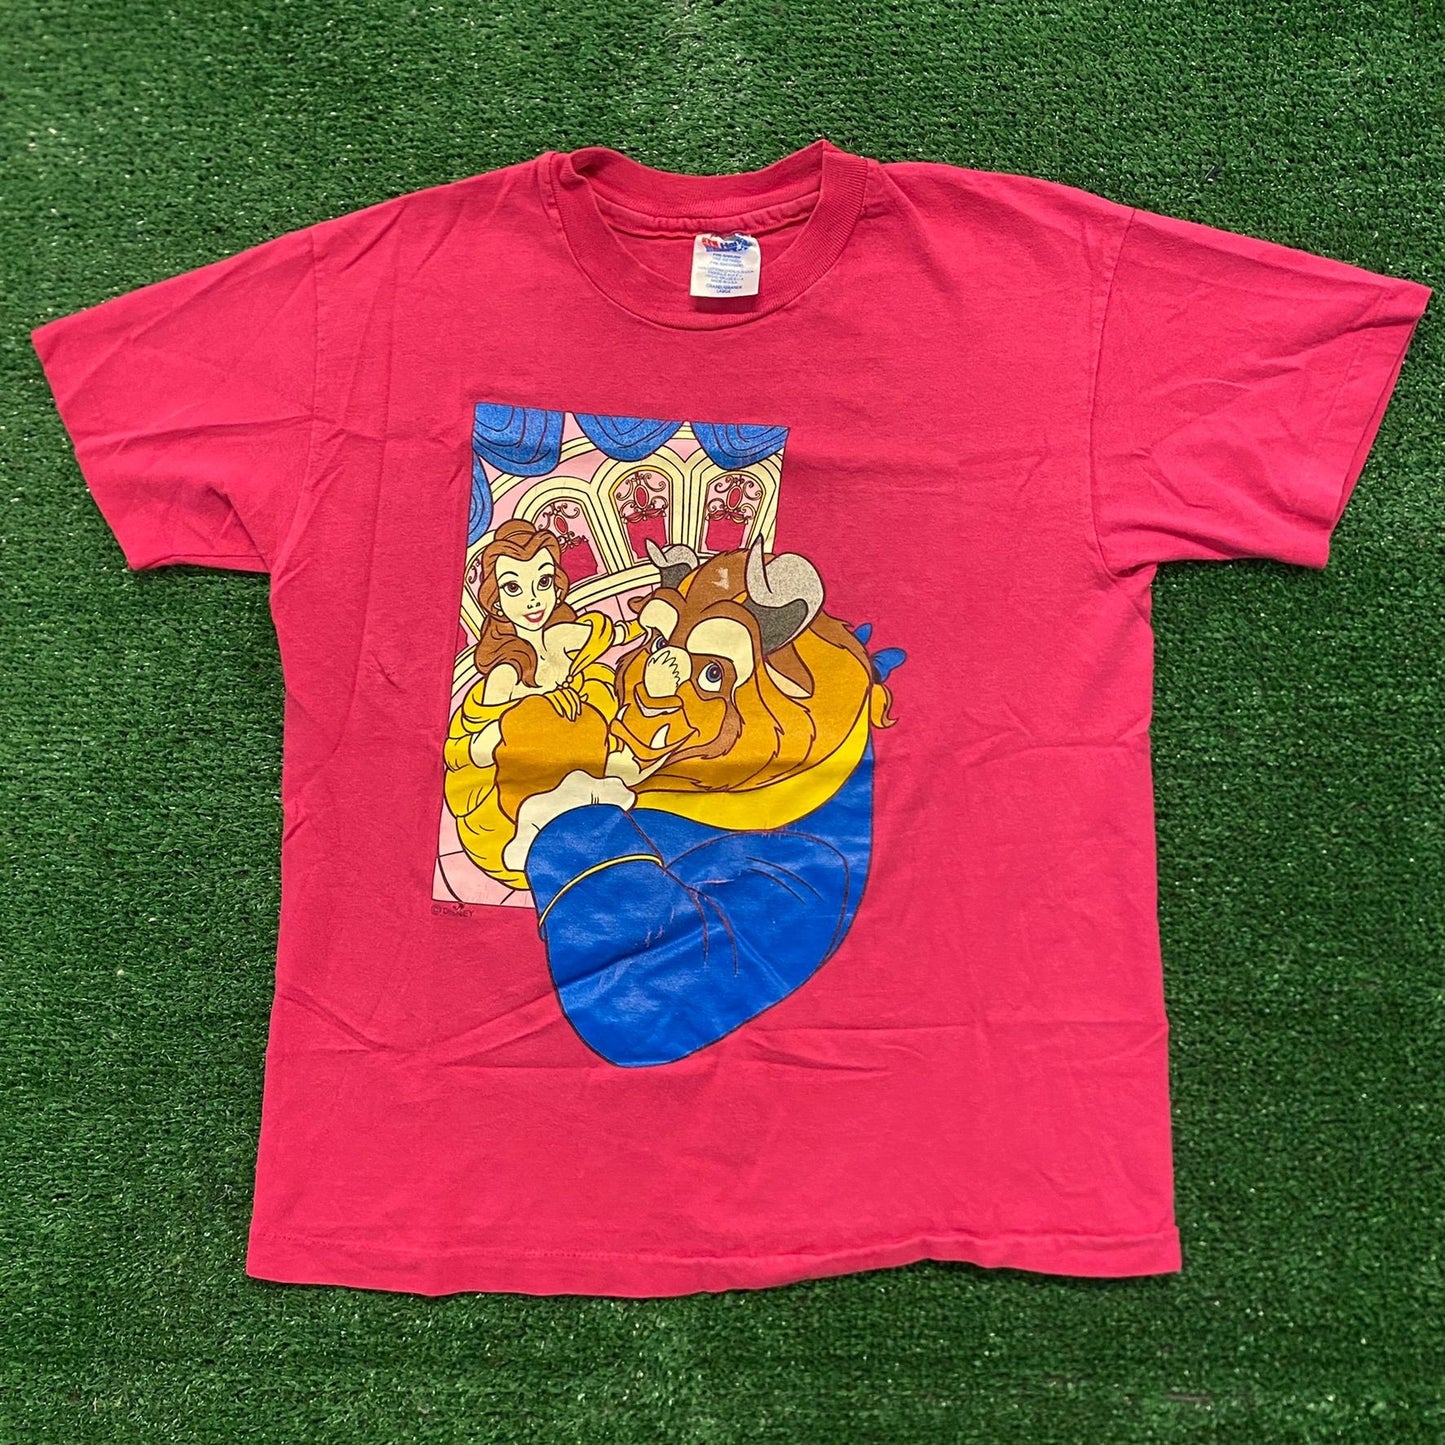 Beauty and the Beast Vintage 90s Movie T-Shirt